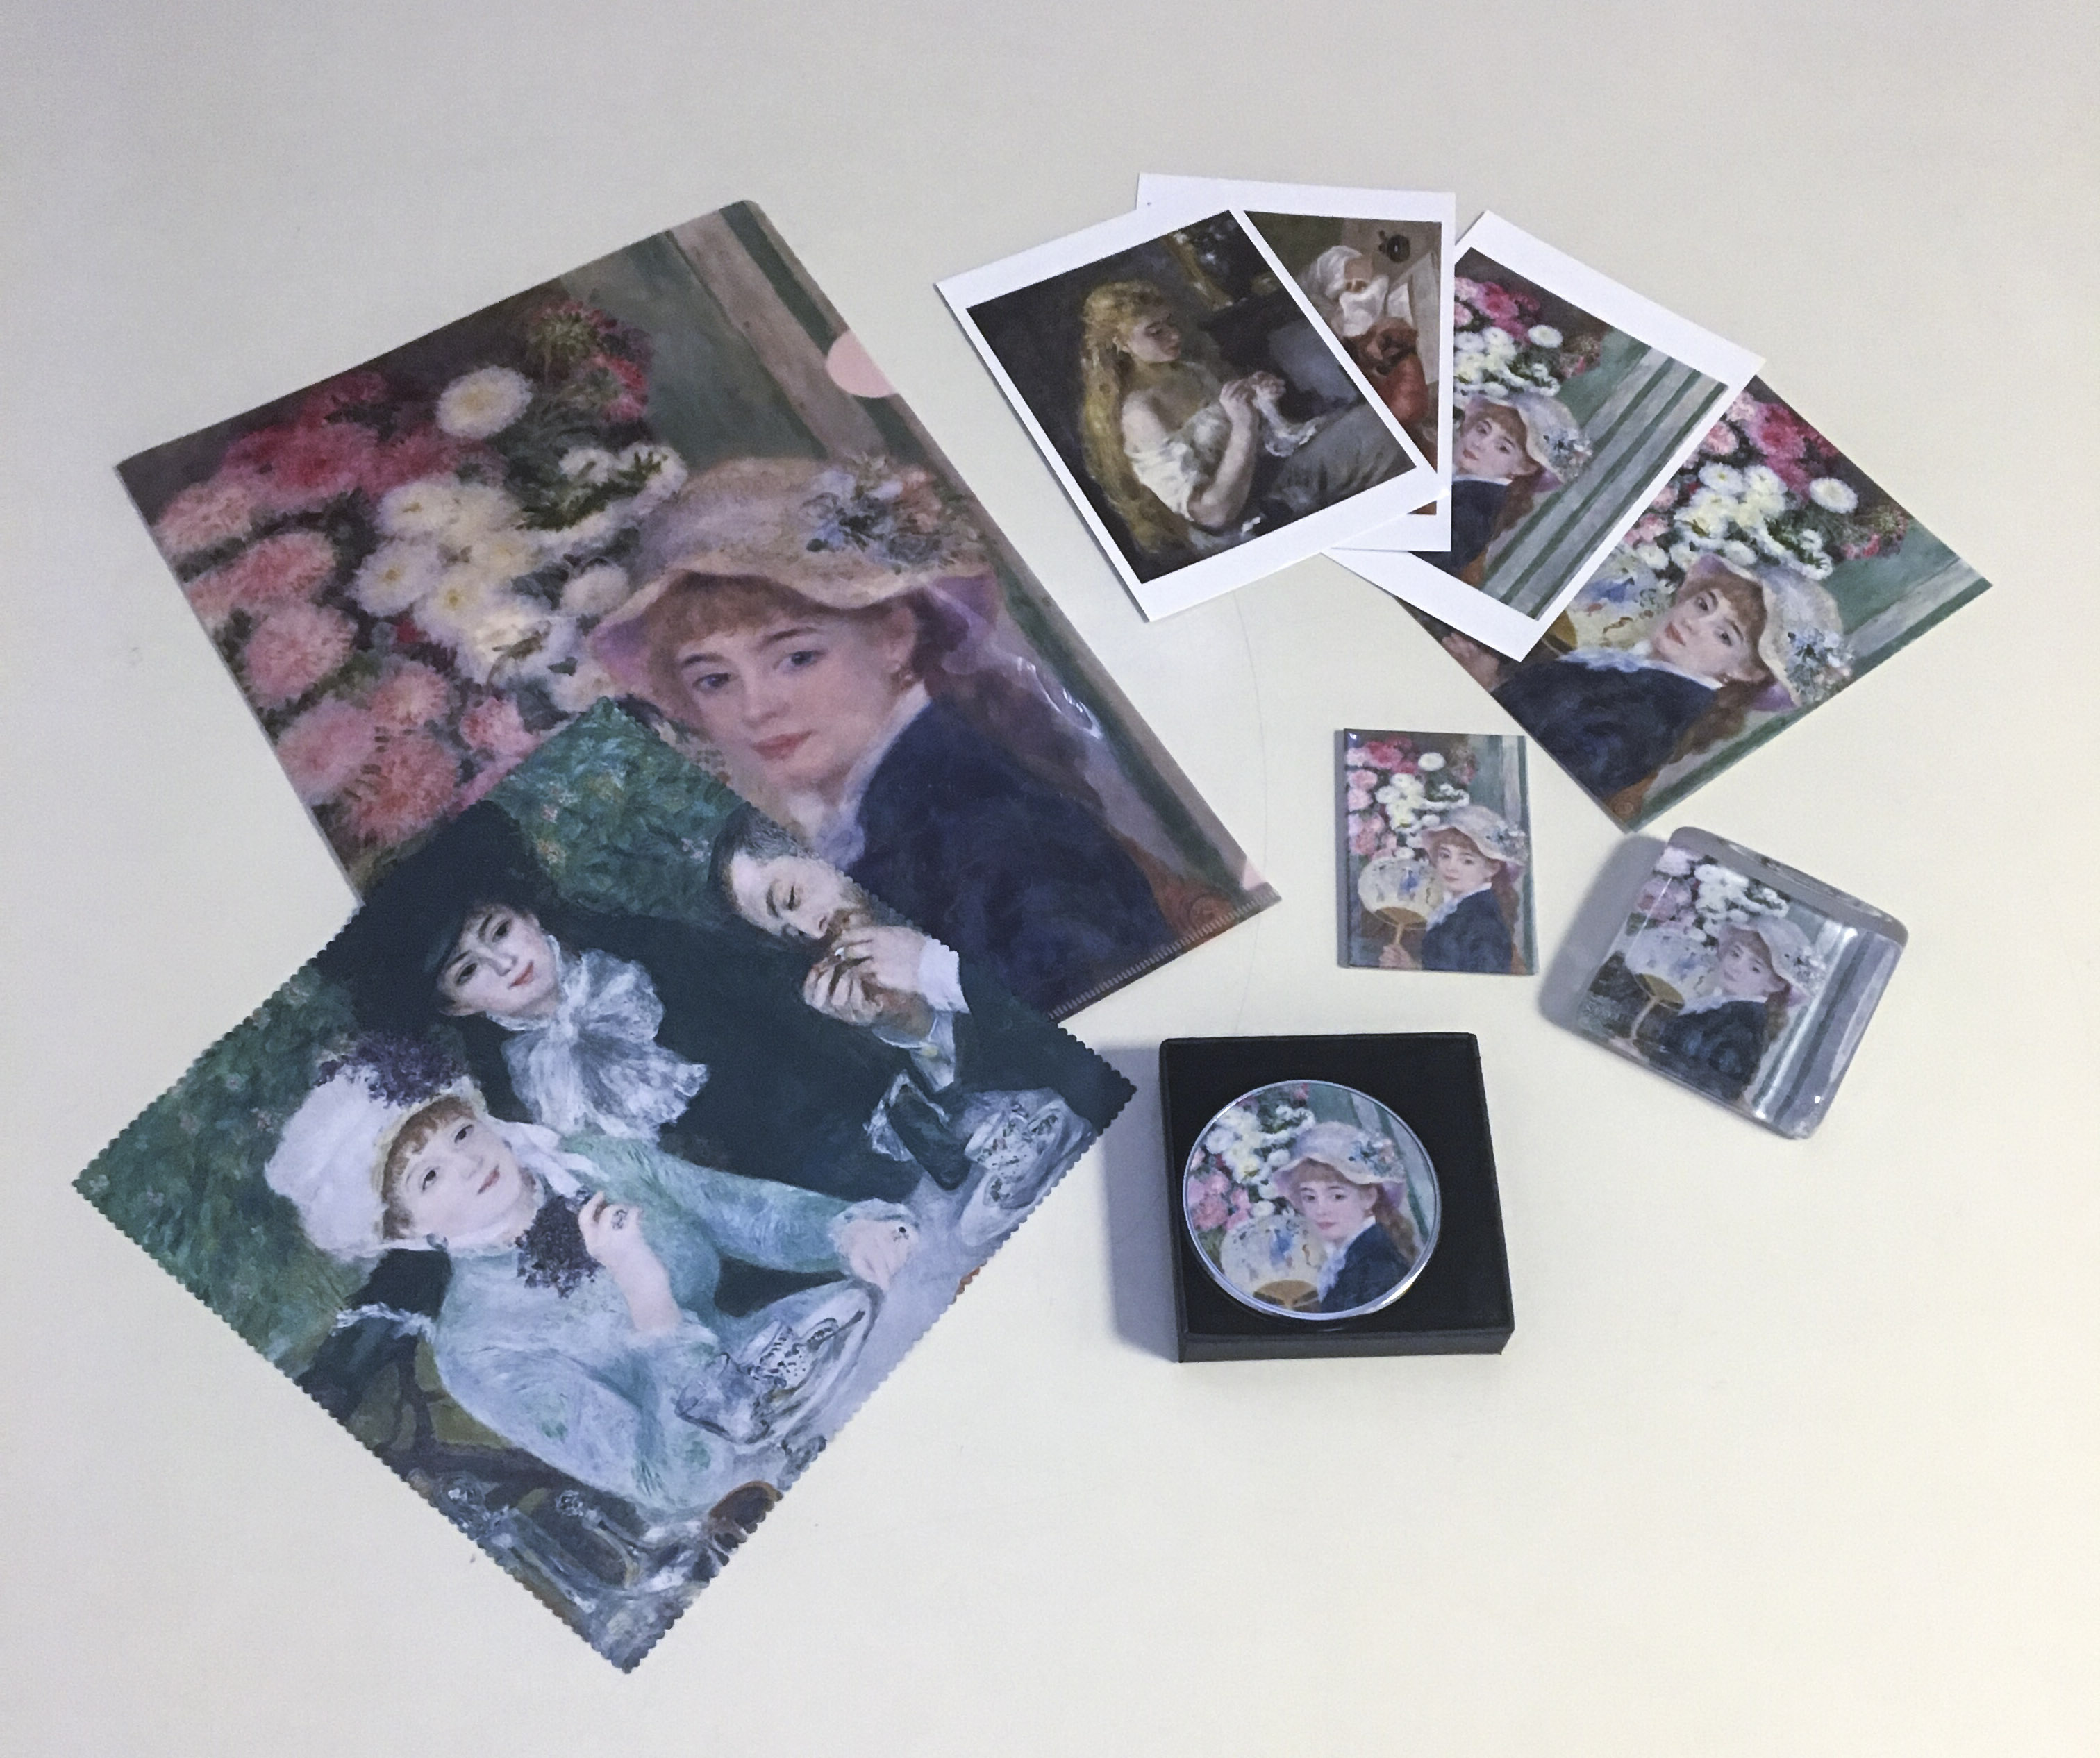 Image of the range of exhibition materials such as the catalog, postcards, magnets, paper holders, glasses cloth, compact mirrors and paper folders featuring Renoir images